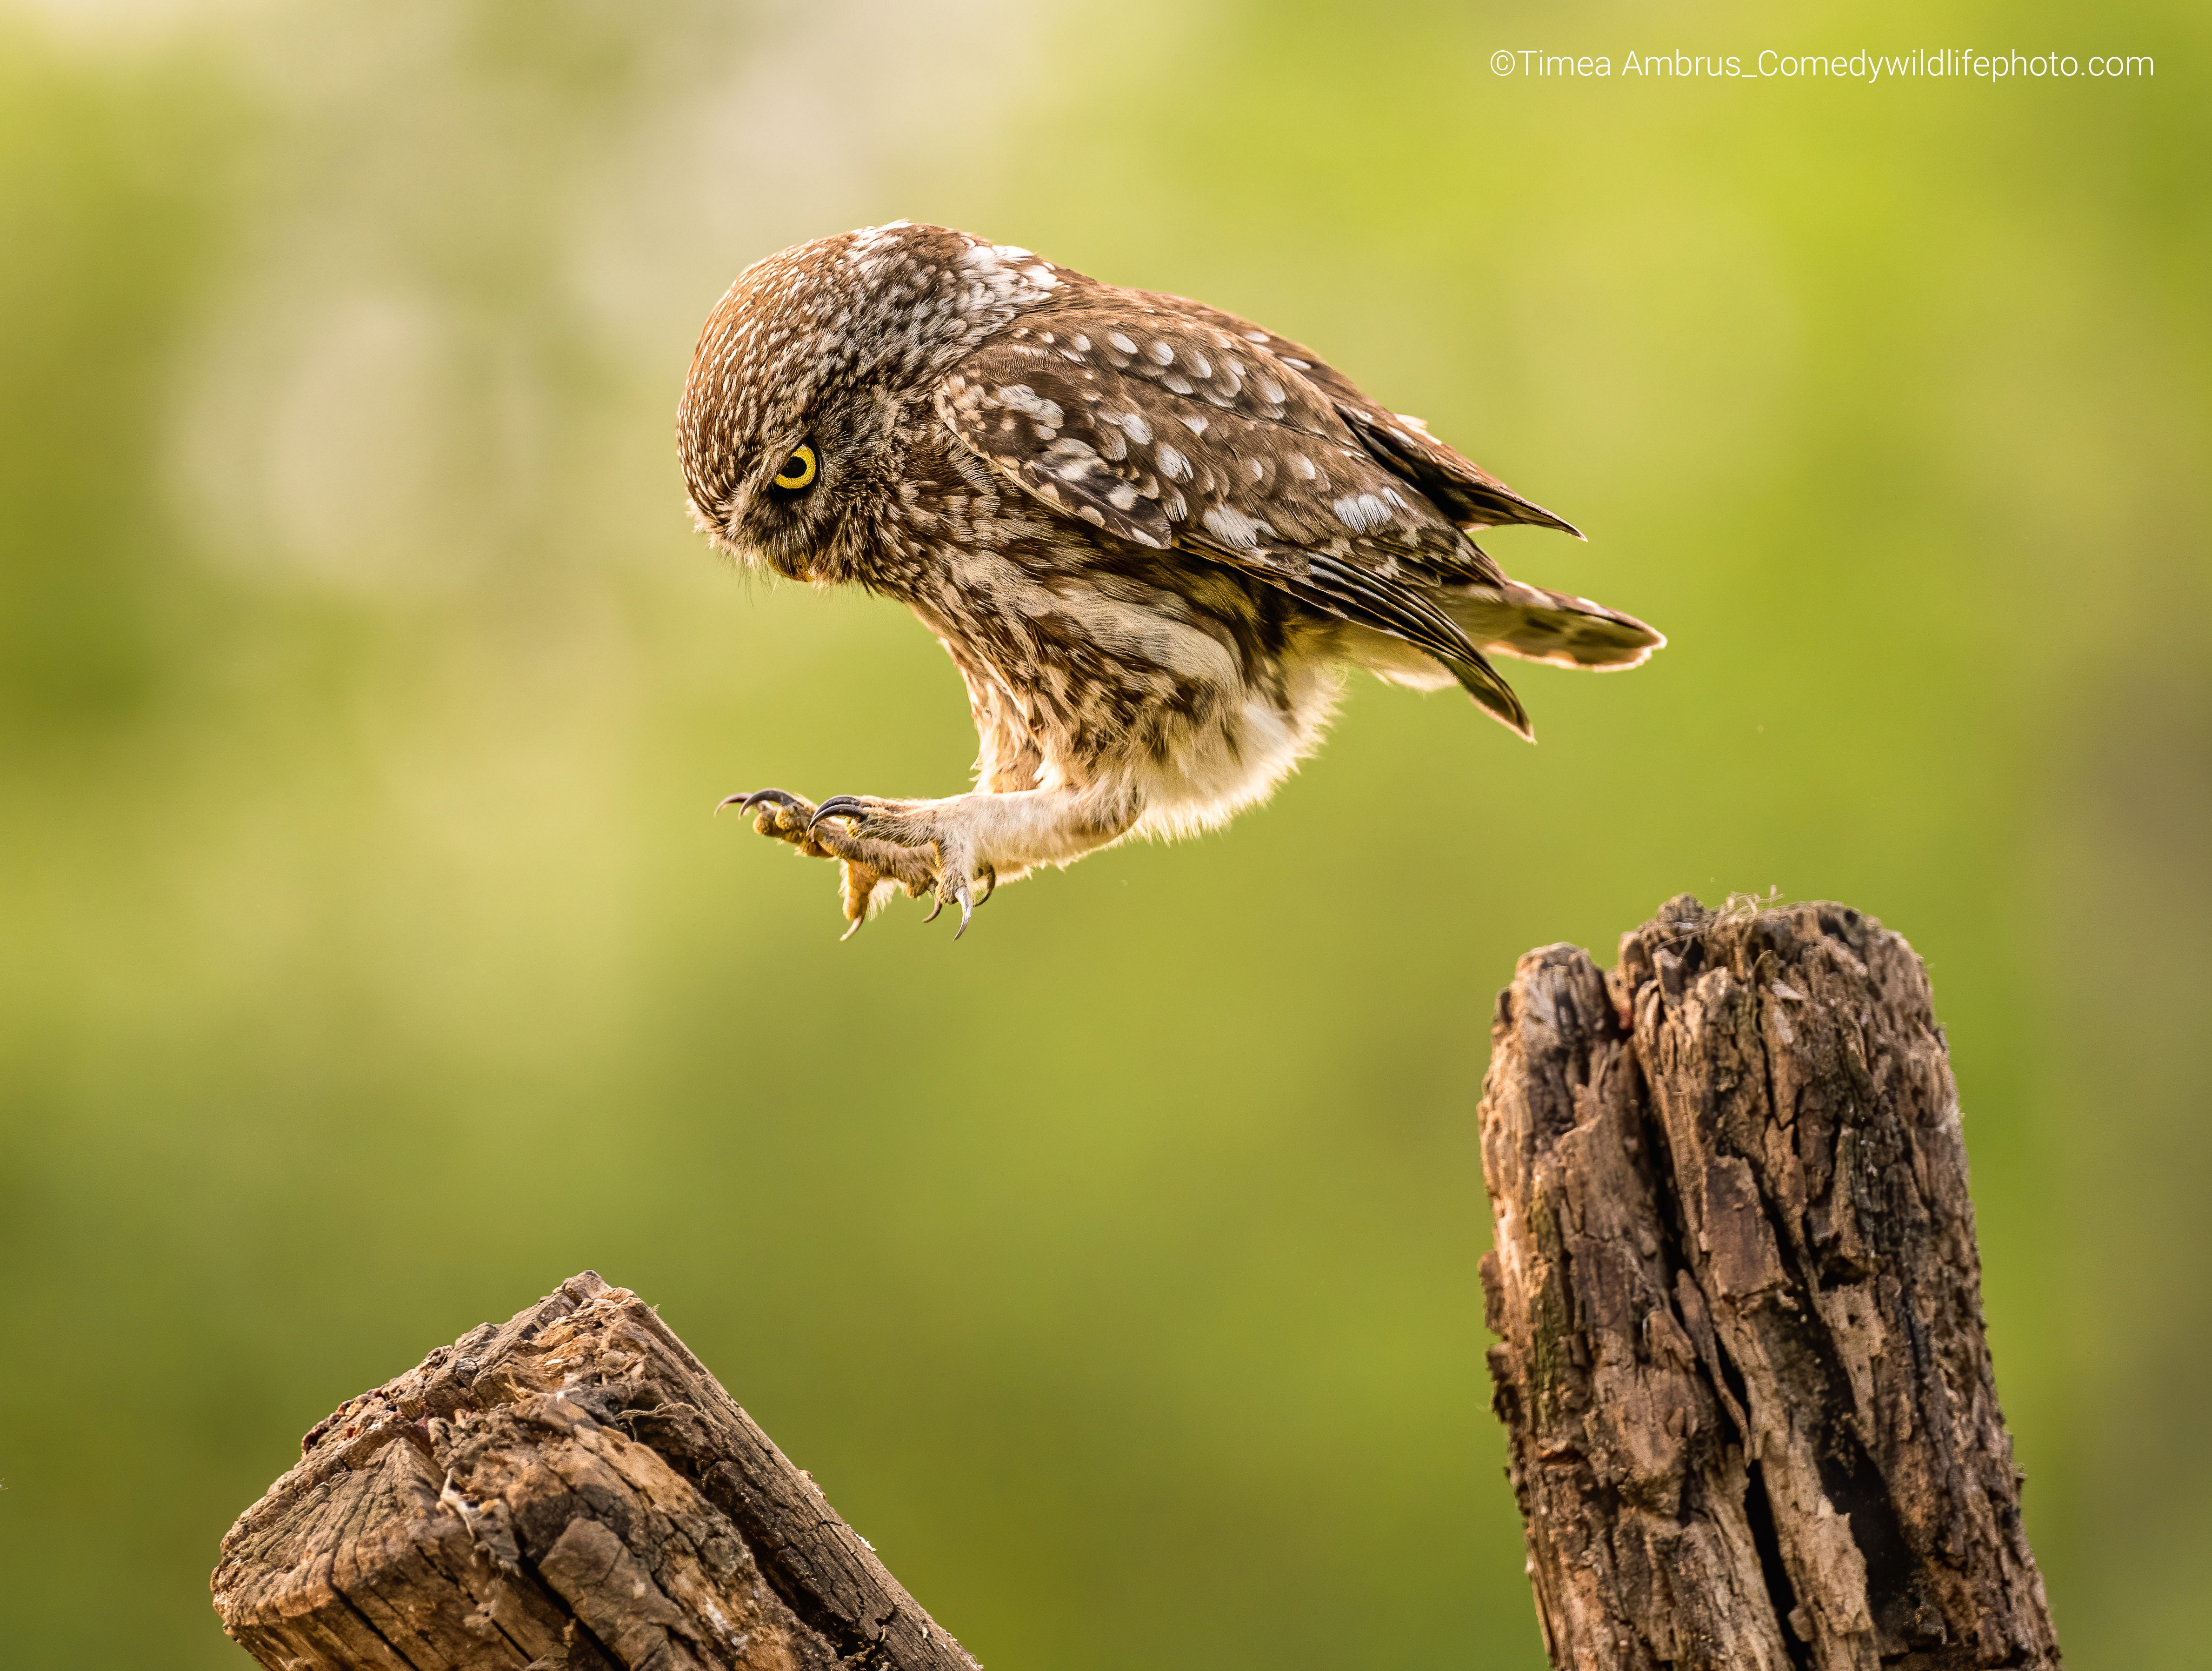 An owl hops from one branch to another. (Photo: © Tímea Ambrus / Comedywildlifephoto.com.)